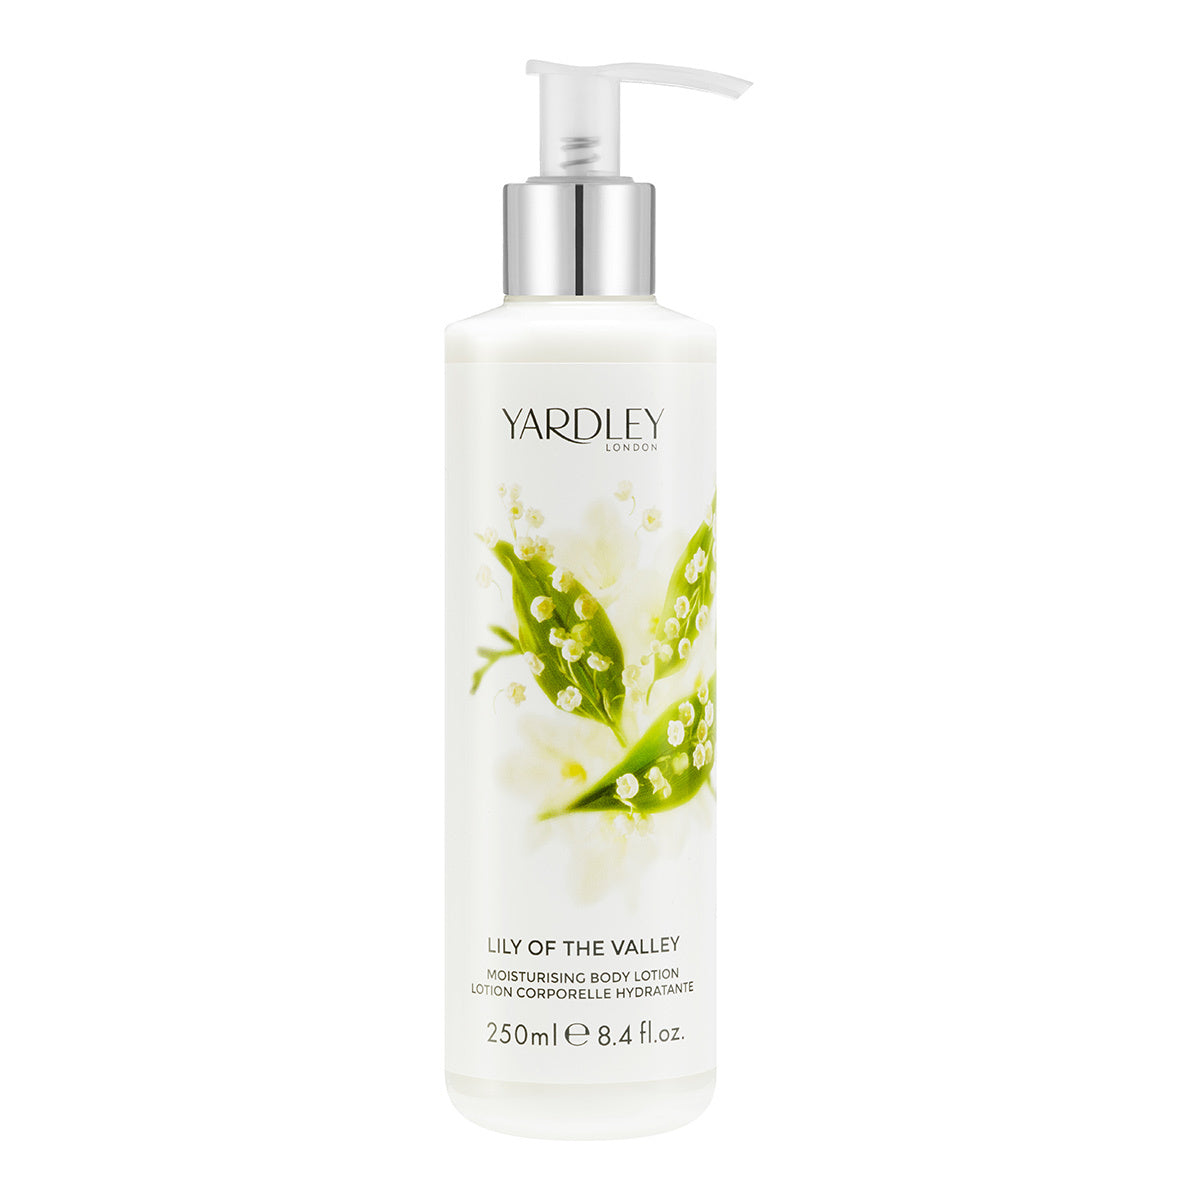 Primary image of Lily of the Valley Body Lotion